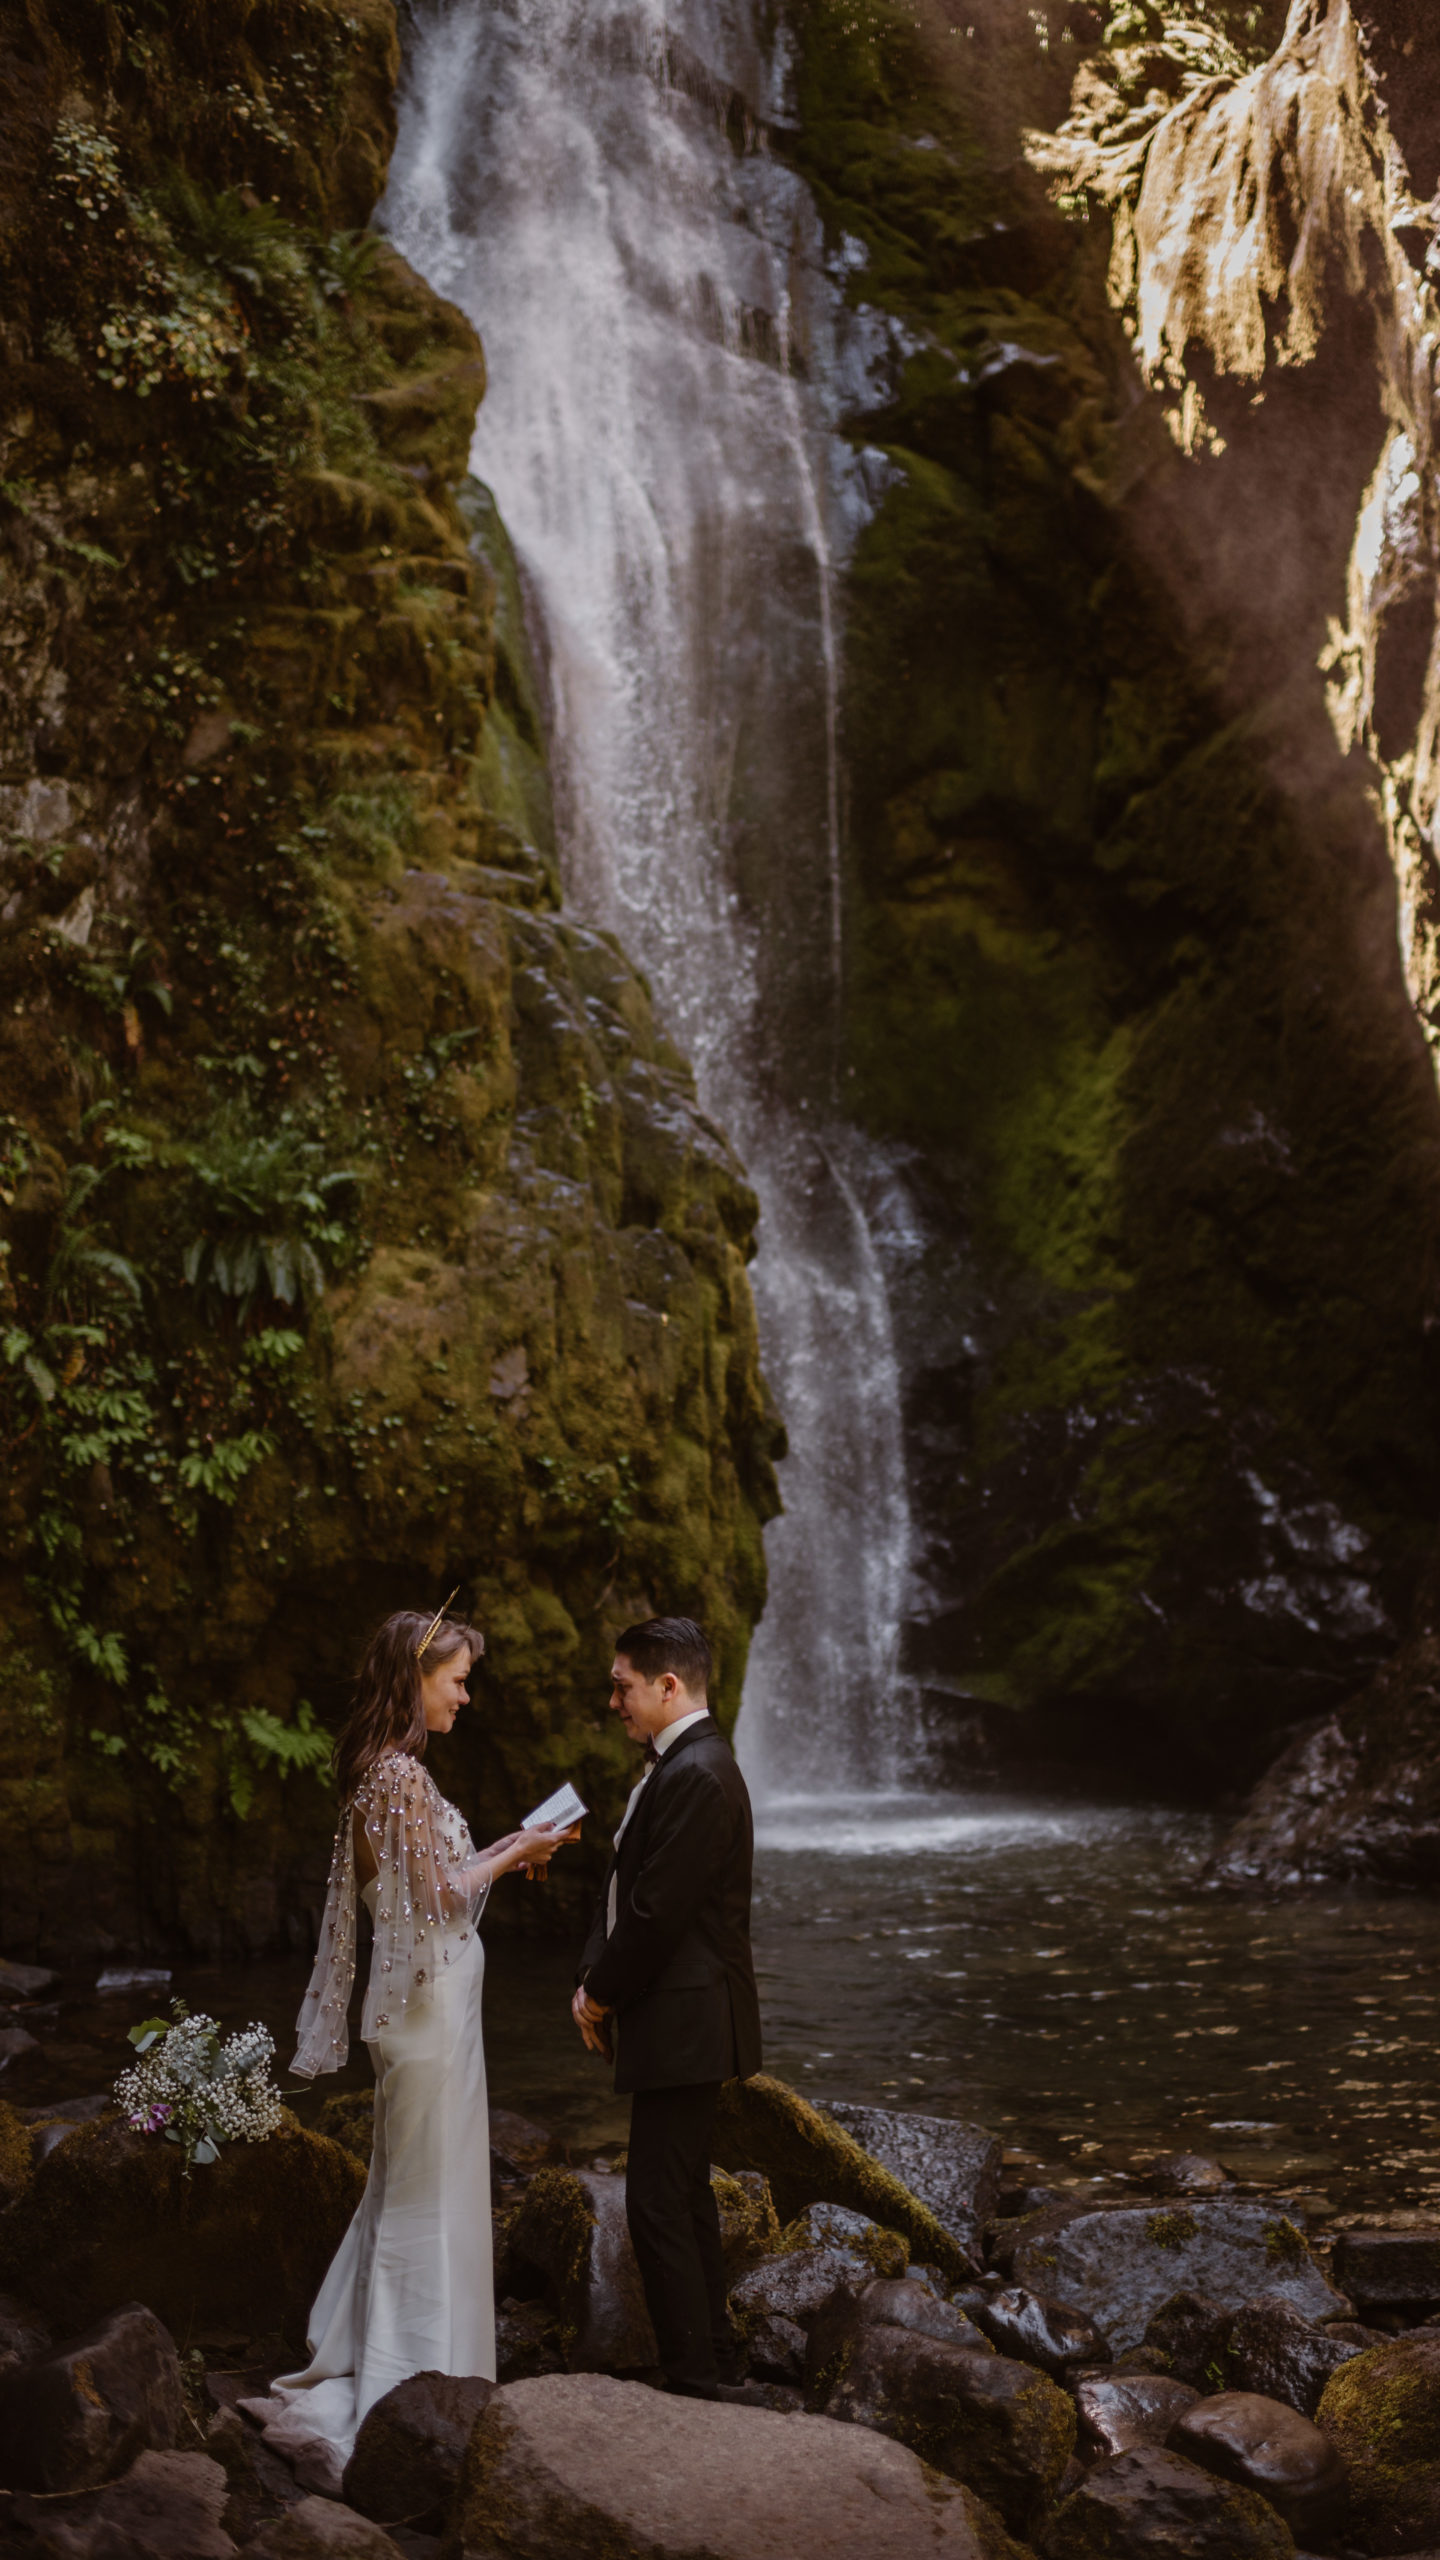 Devlin & Colton elope at one of the many waterfalls near Bridal Veil Falls in the Columbia River Gorge.